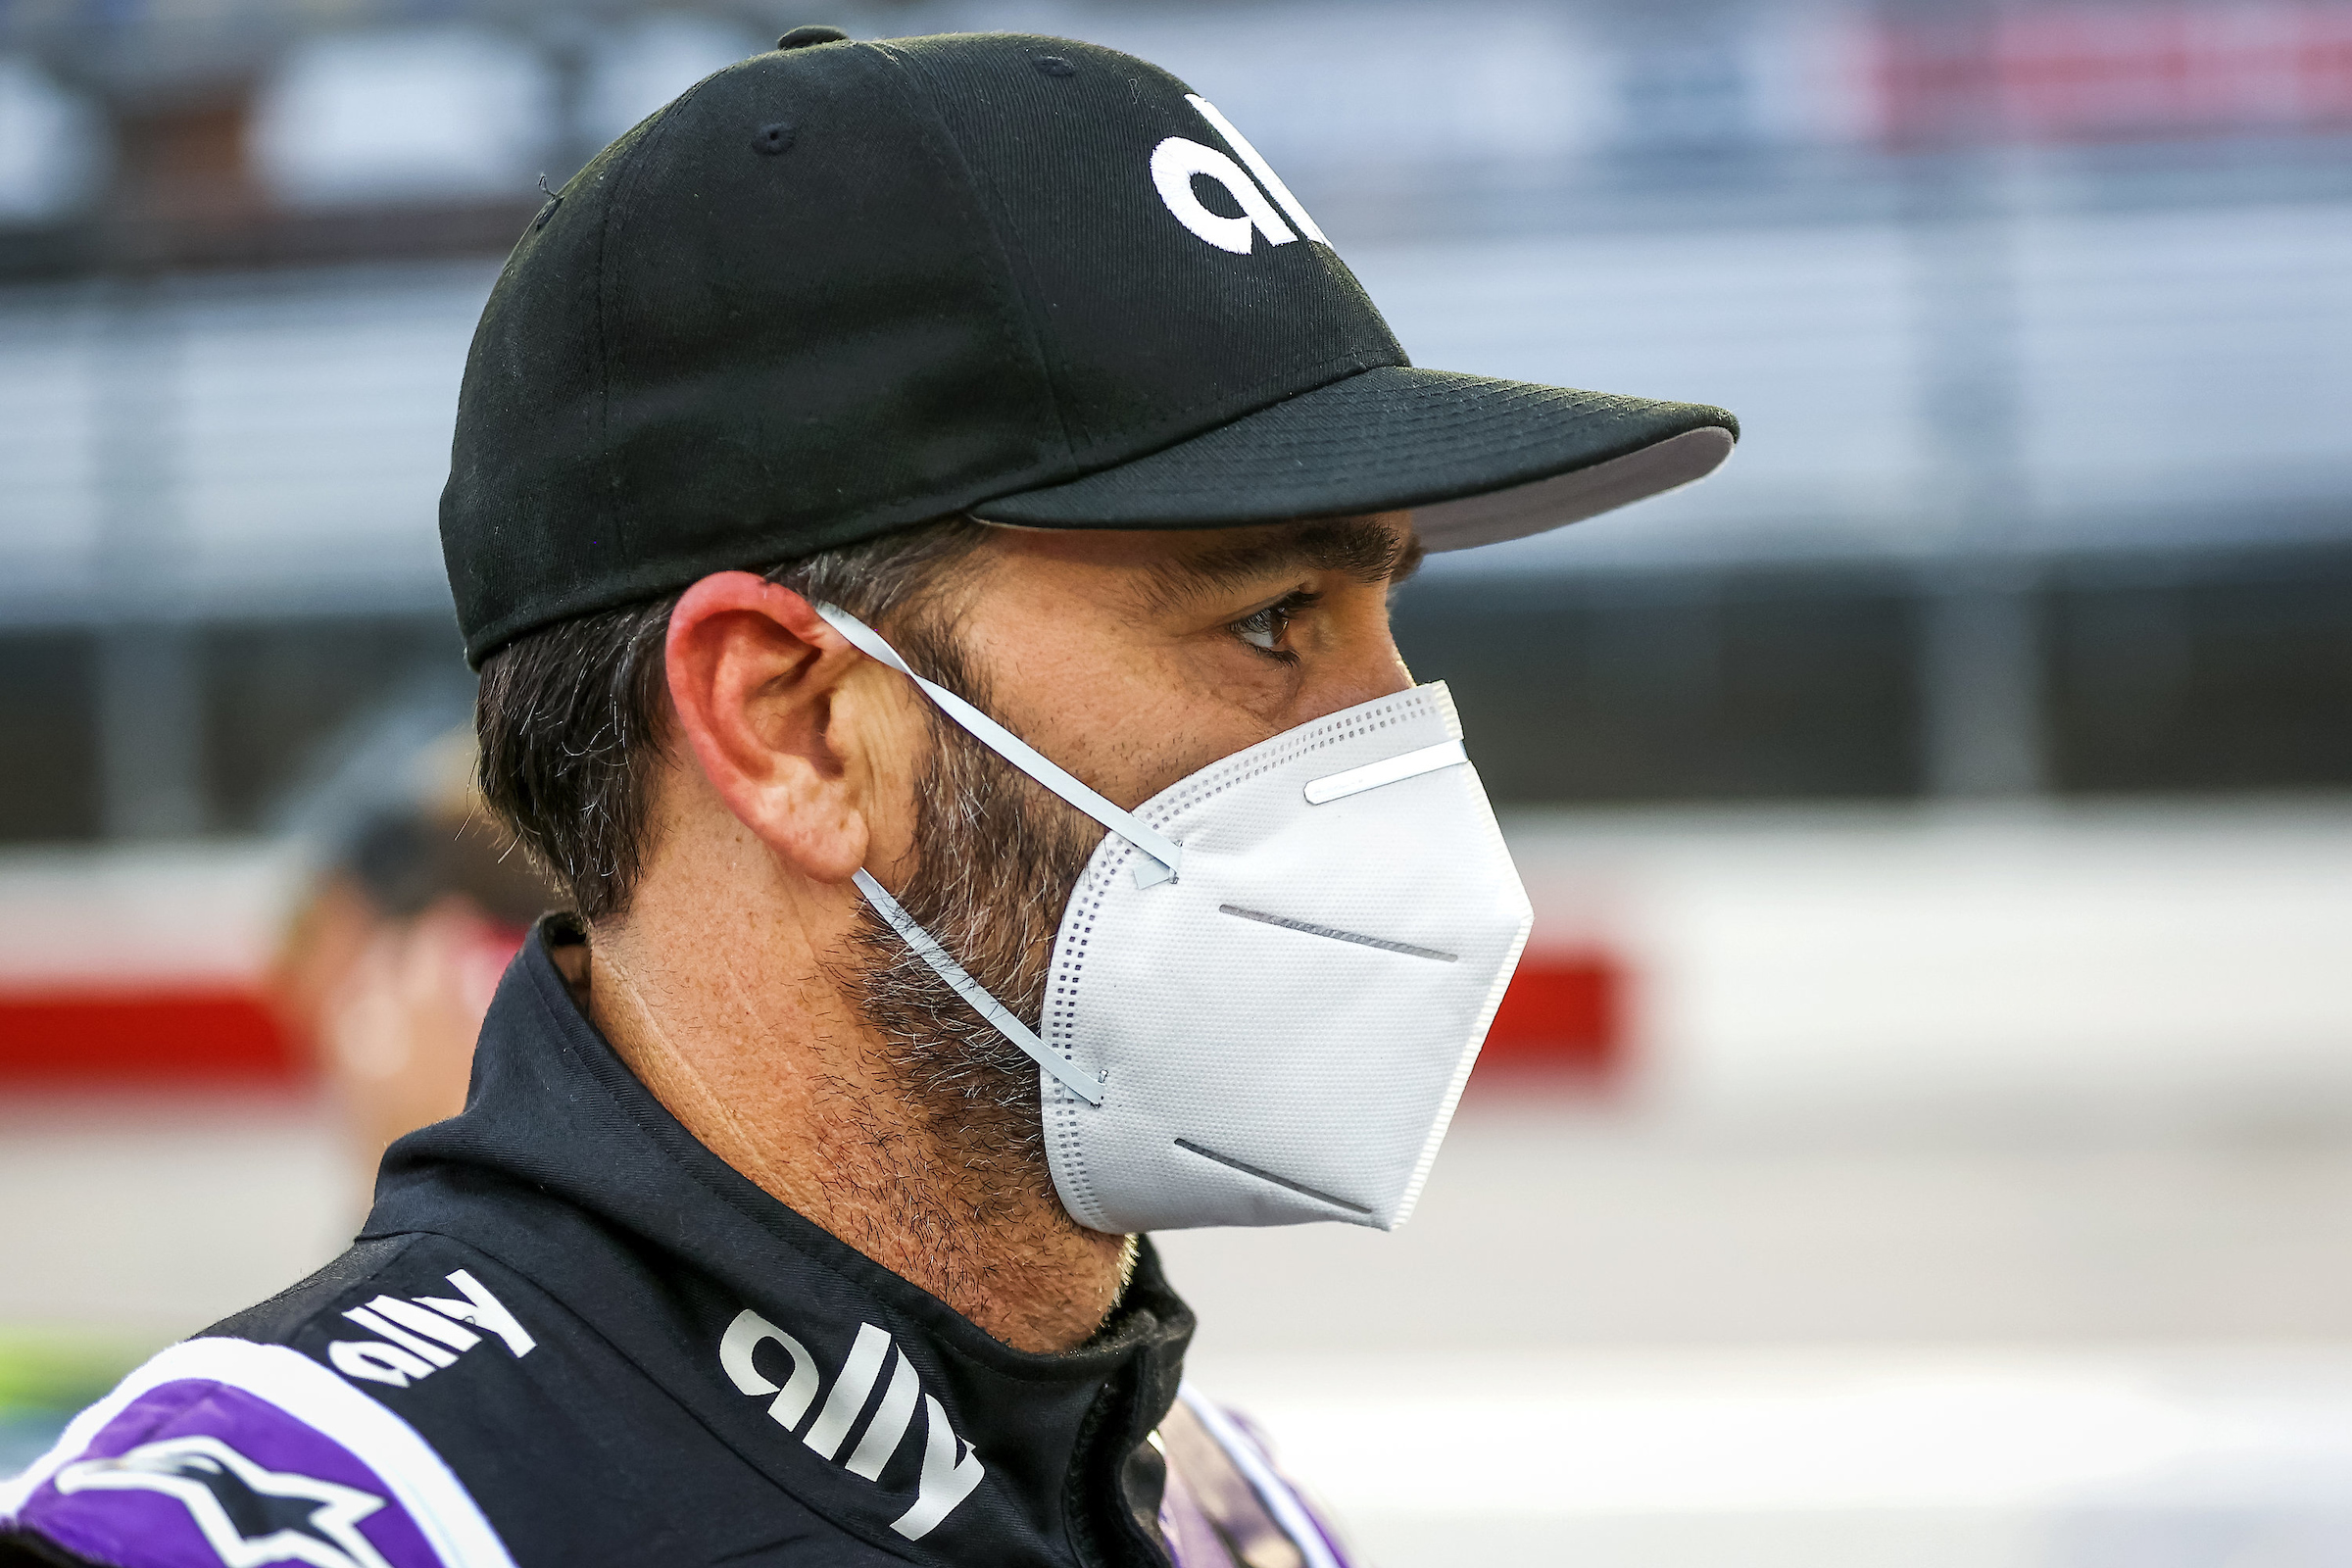 Jimmie Johnson tests positive for Covid-19, Justin Allgaier to drive
the 48 car